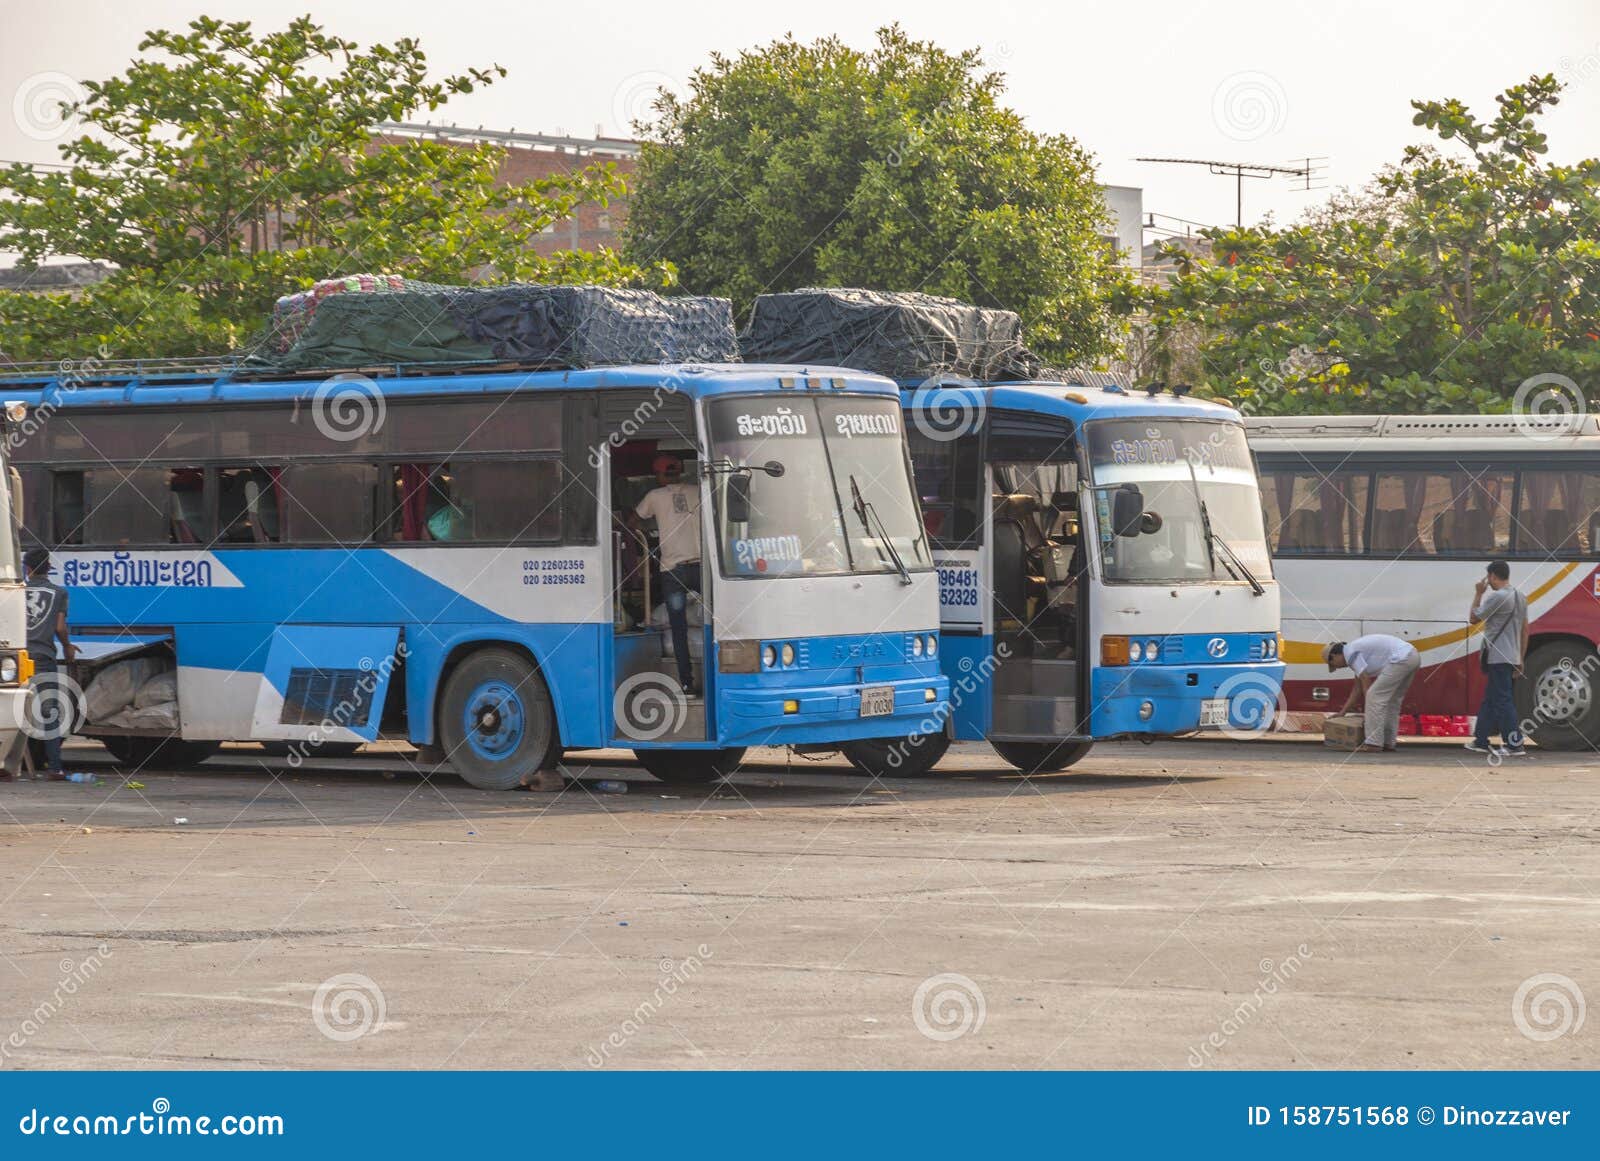 bus station for travel